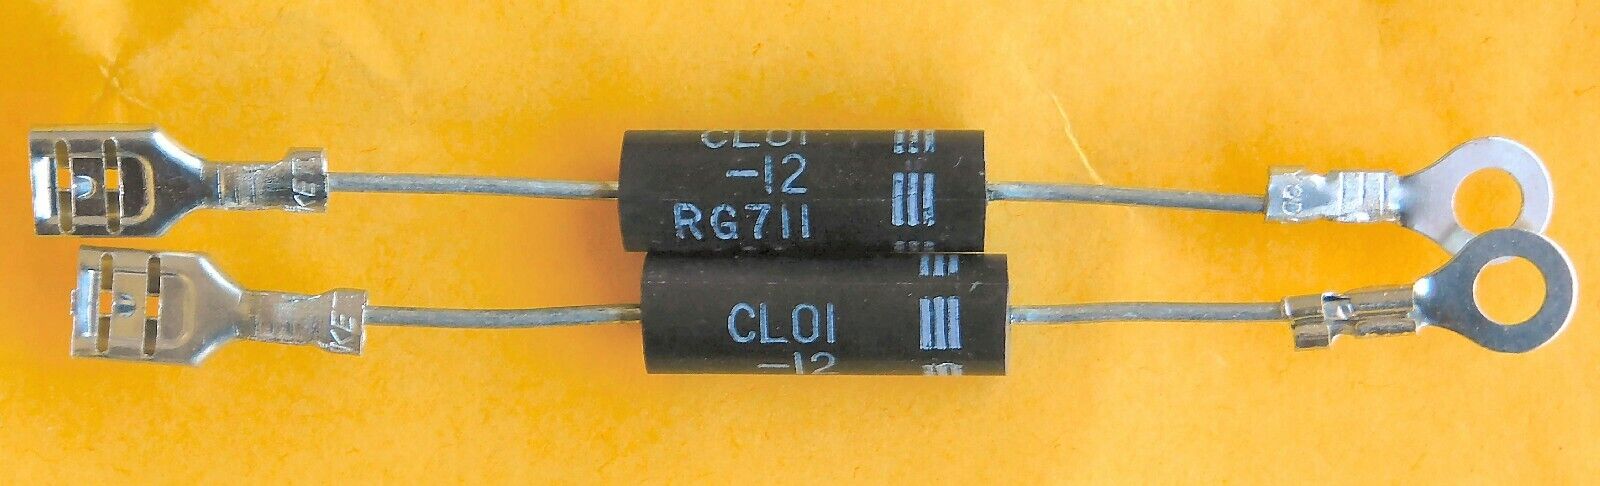 2pcs HVM12 CL01-12 Microwave Oven High Voltage Diode Rectifier Fast USA Shipping